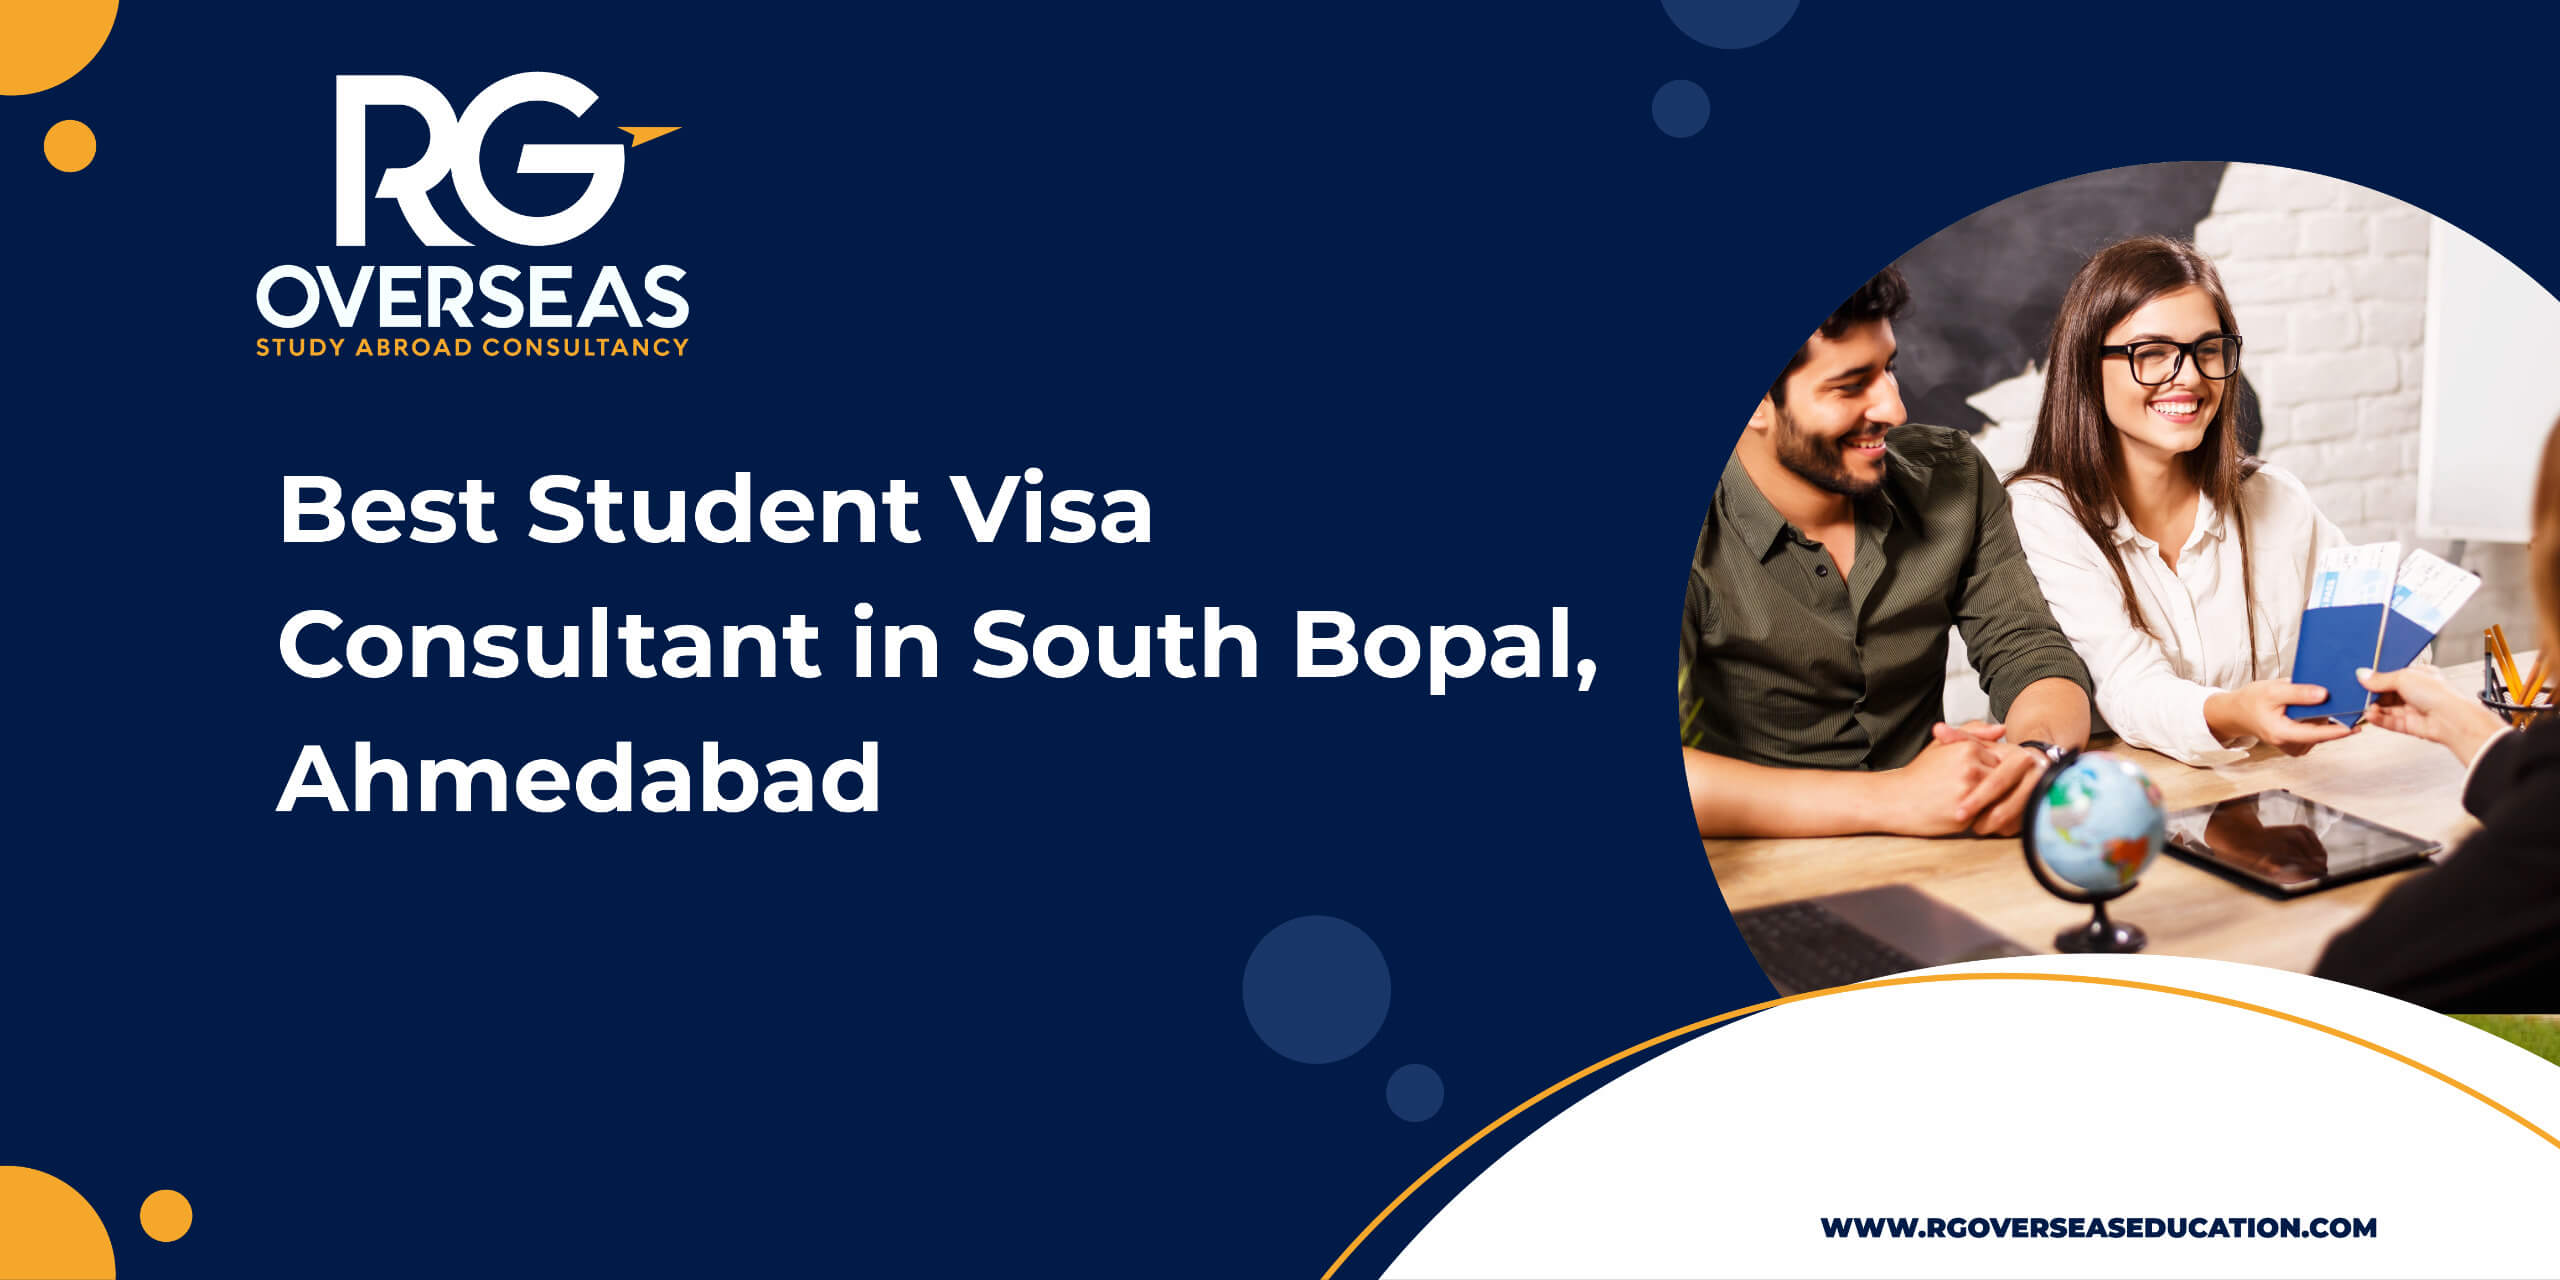 Best Student Visa Consultant in South Bopal, Ahmedabad